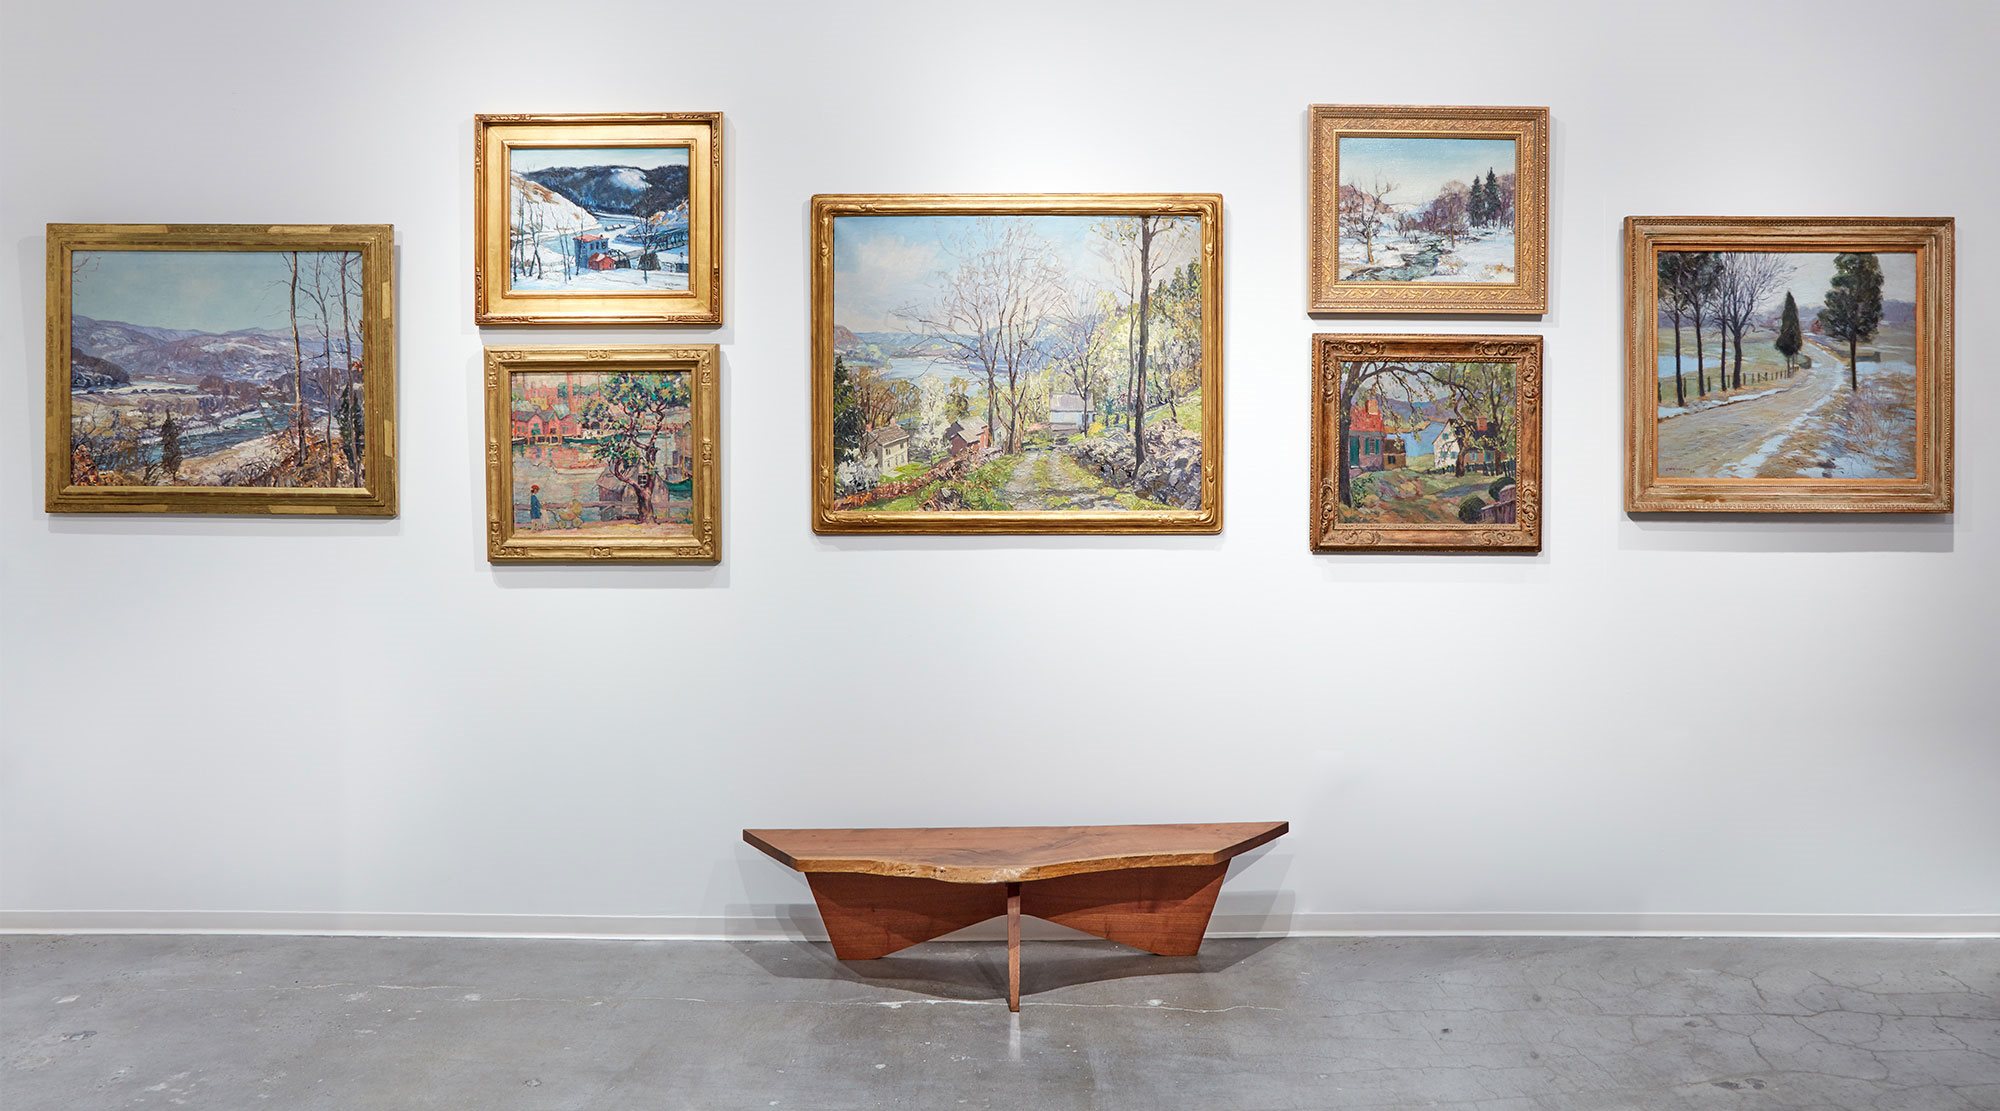 Exhibition view of The Collection of Heidi Bingham Stott